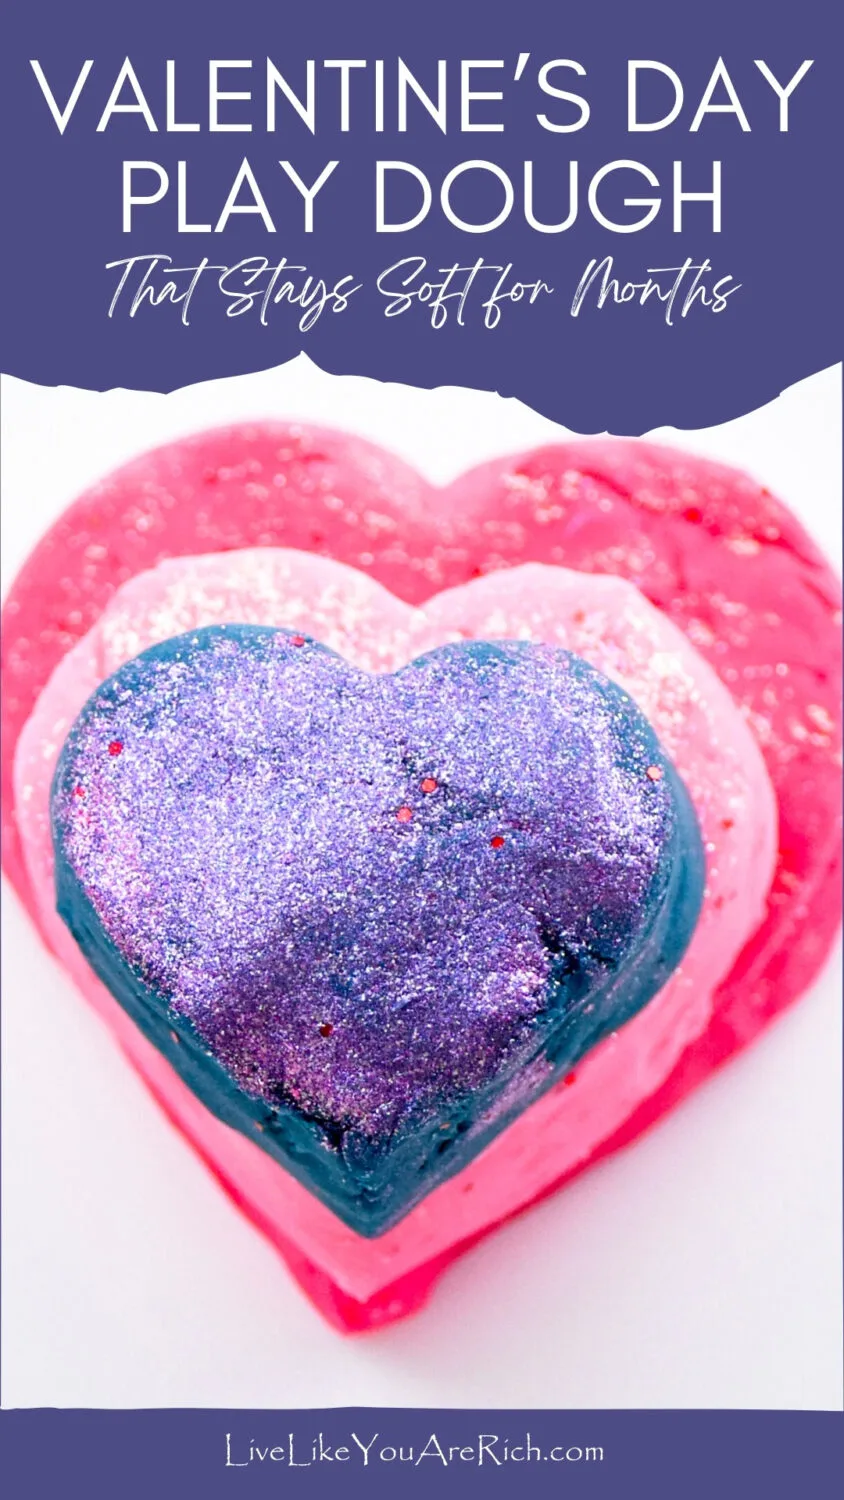 Valentine's Day Play Dough That Stays Soft for Months